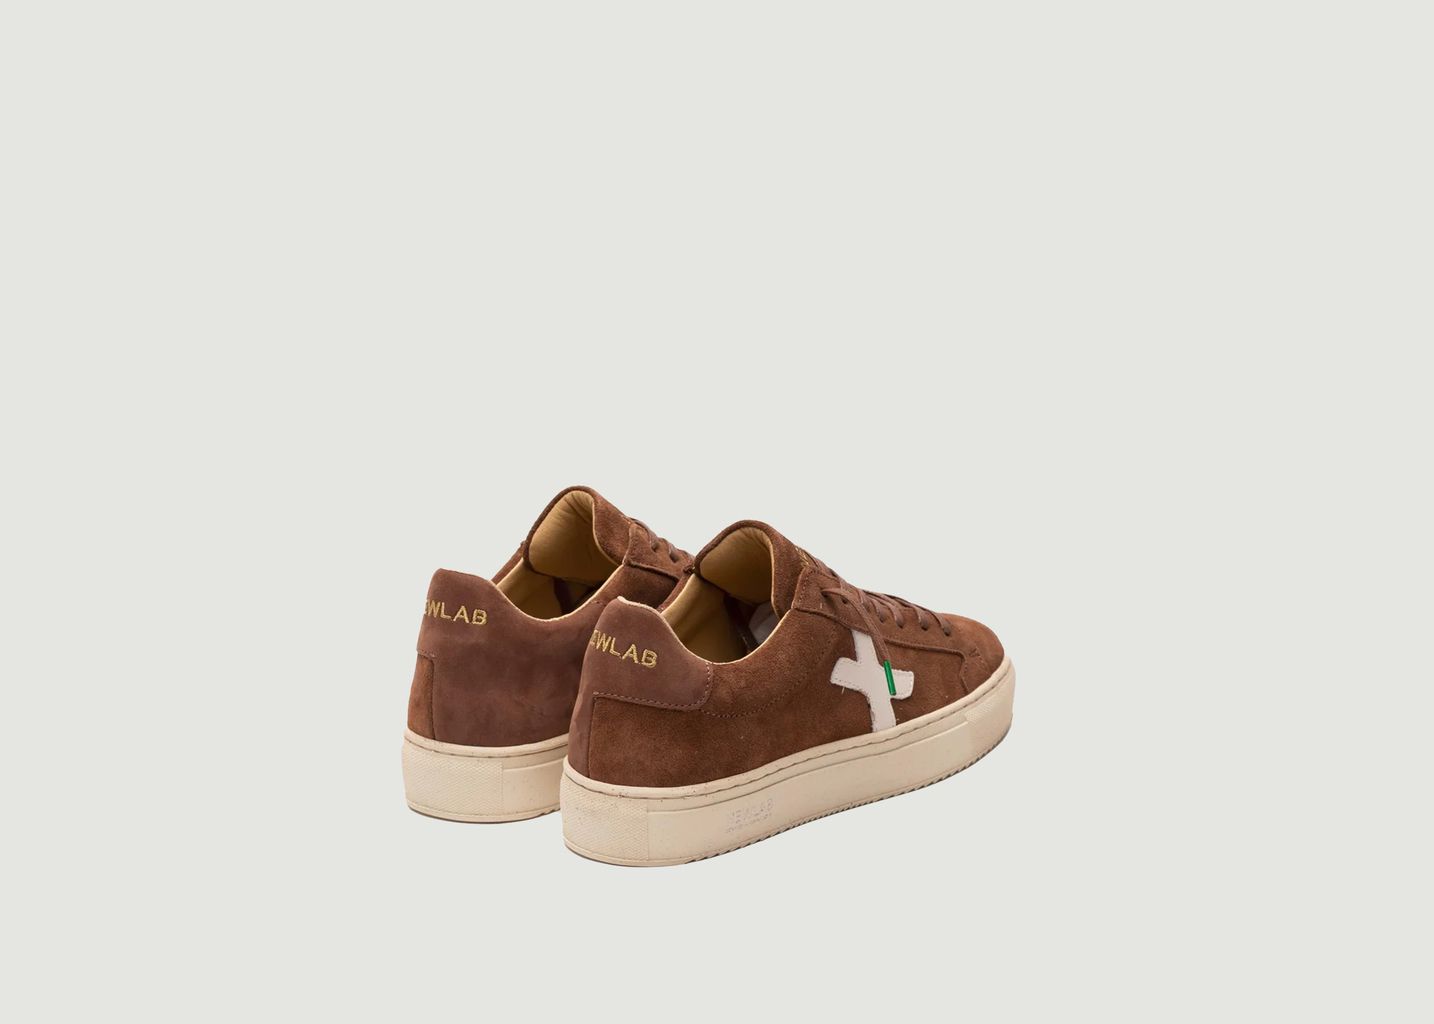 Sneakers NL08 Camel/White - Newlab